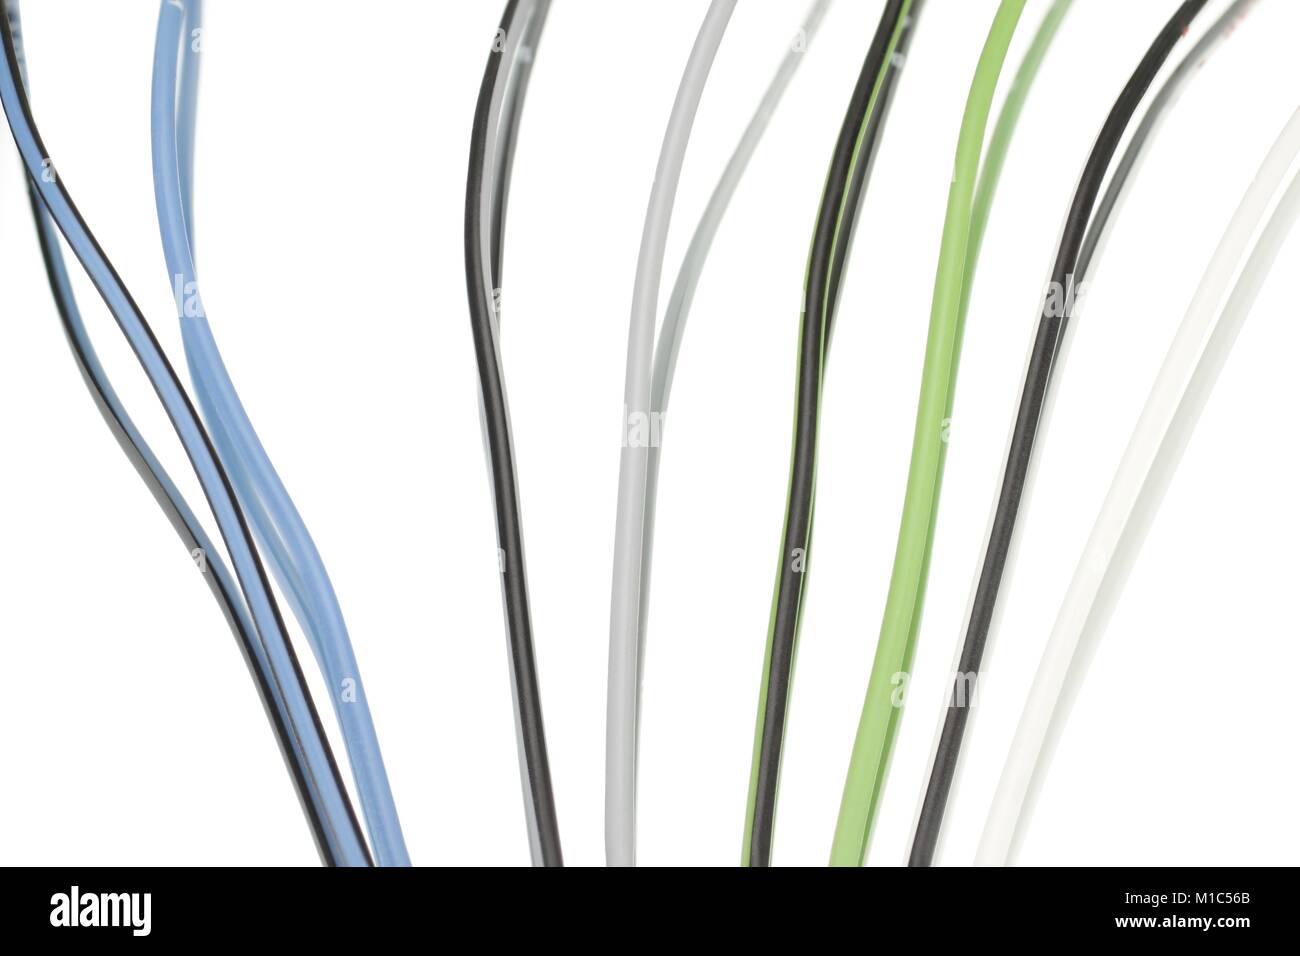 Simple colorful cables against white background with reflection Stock Photo